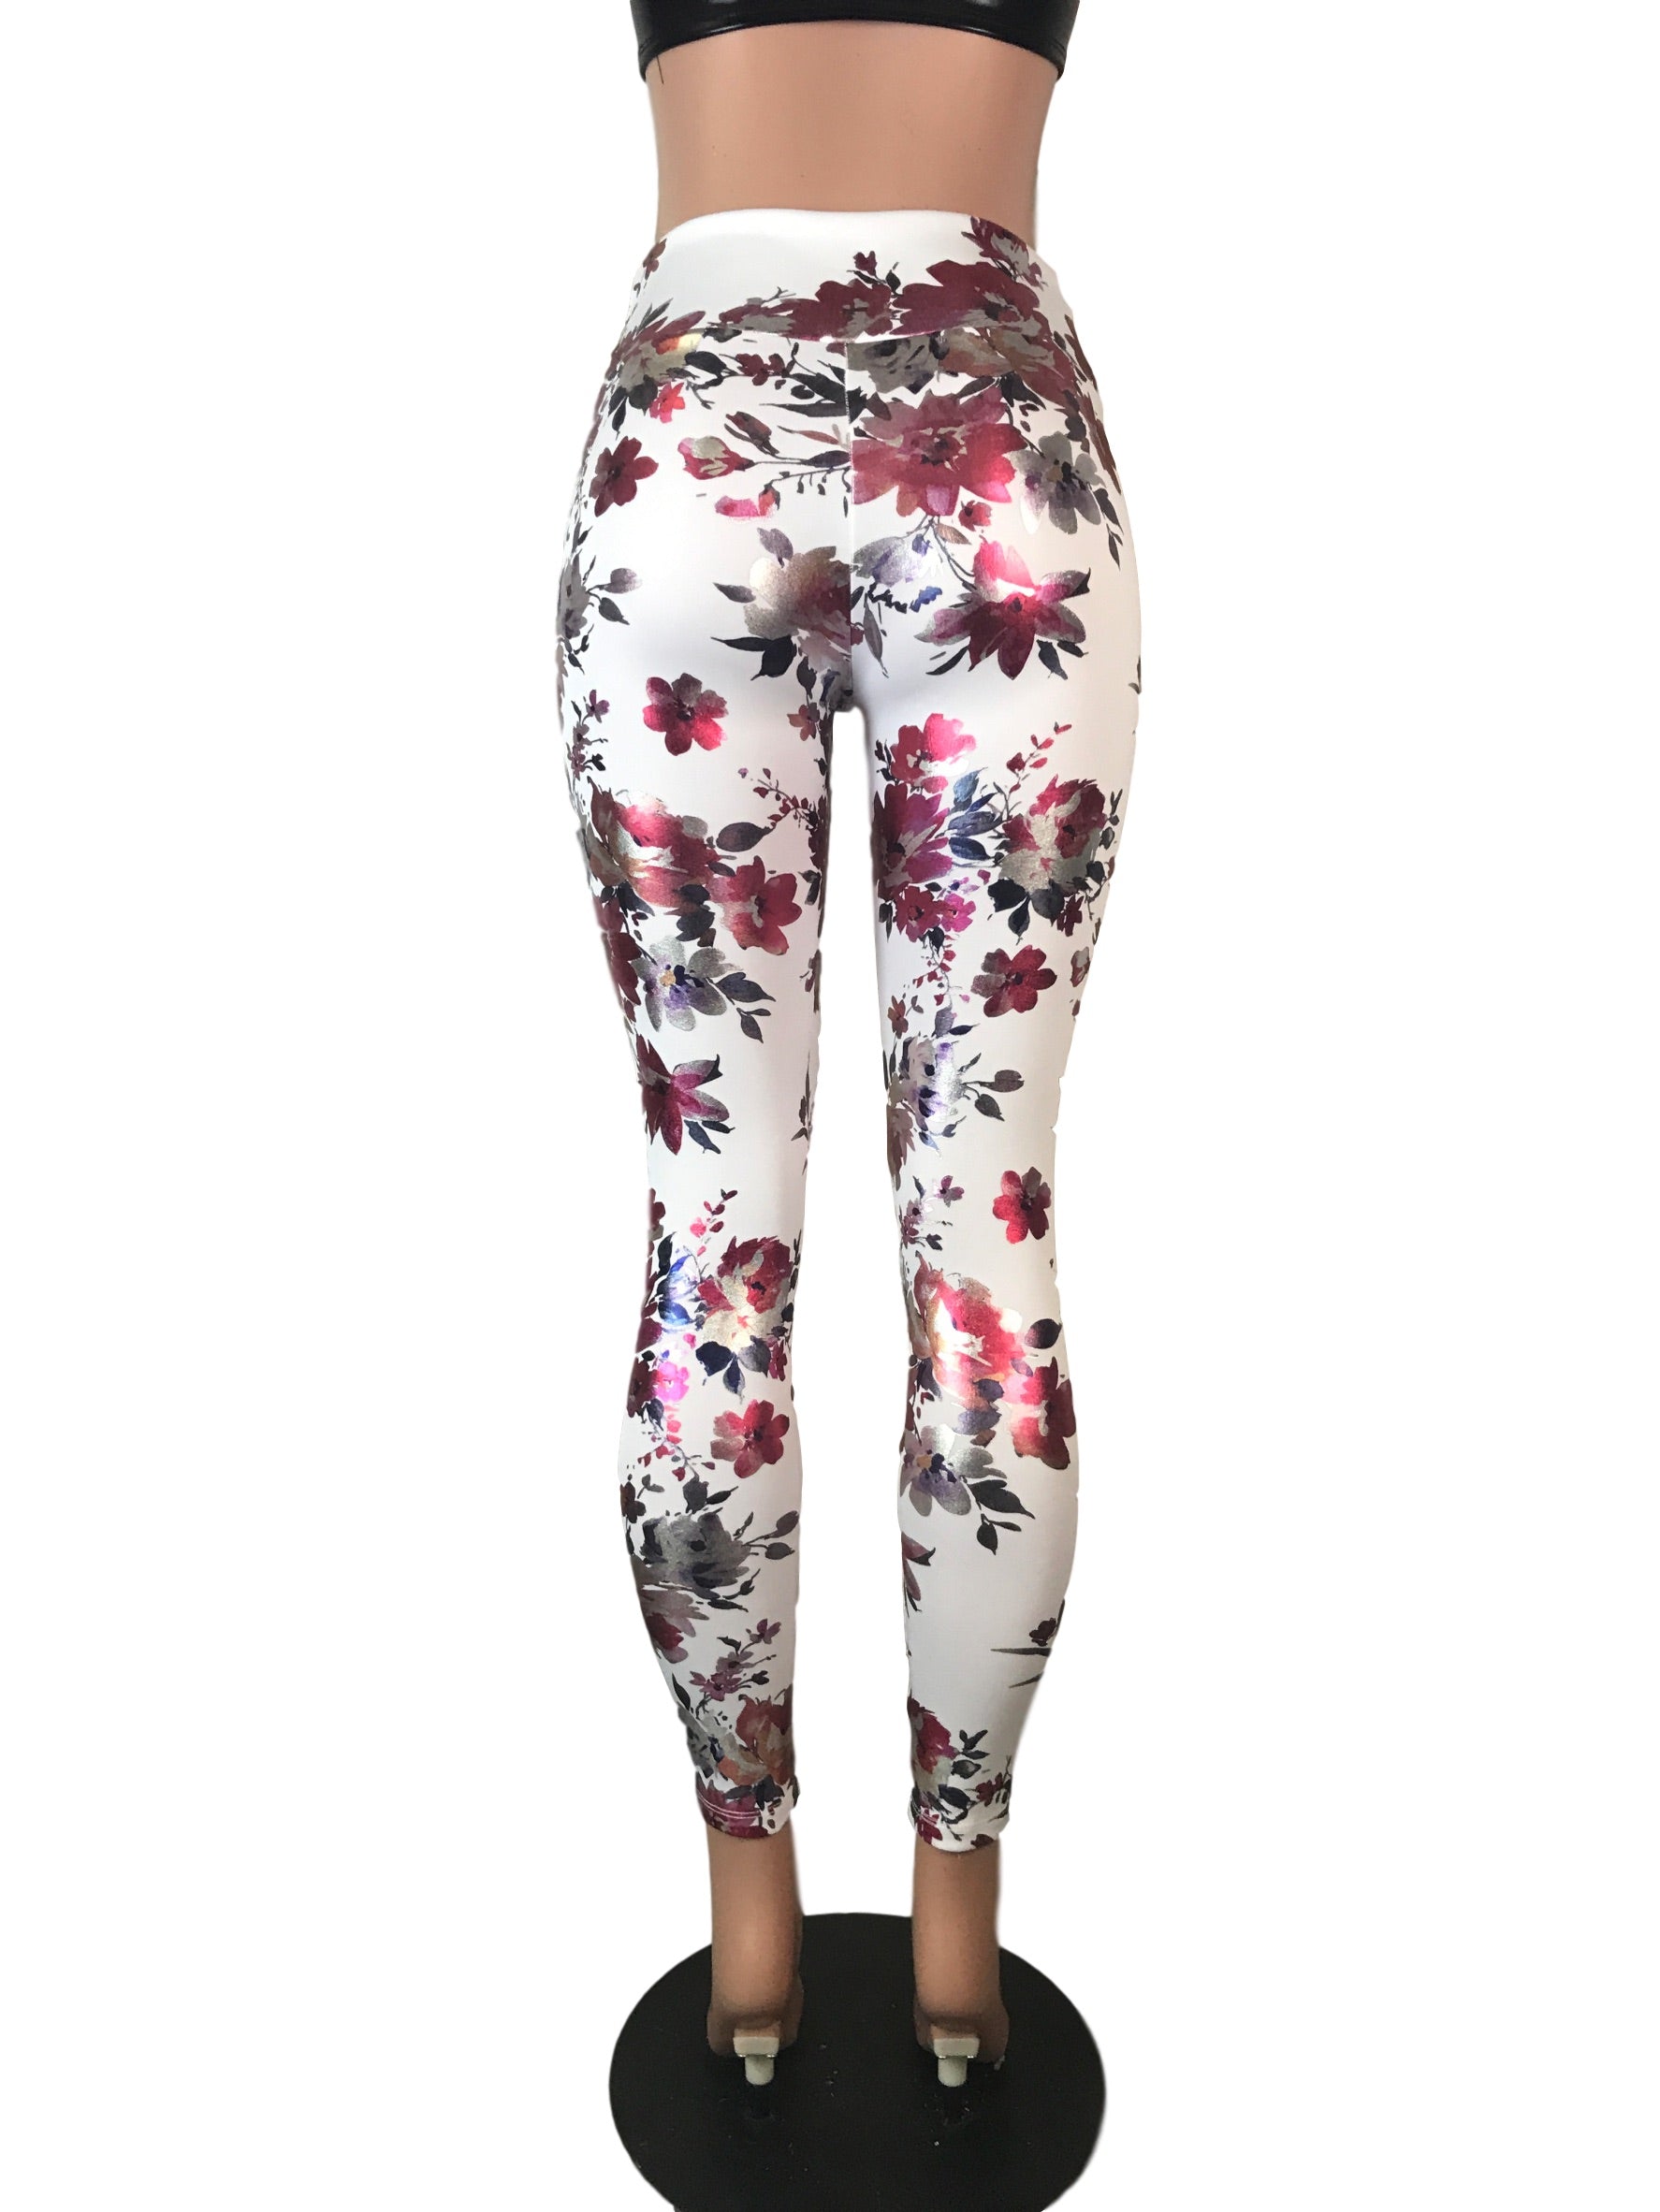 SALE - SMALL ONLY - Floral Metallic High-Waisted Leggings Pants– Peridot  Clothing